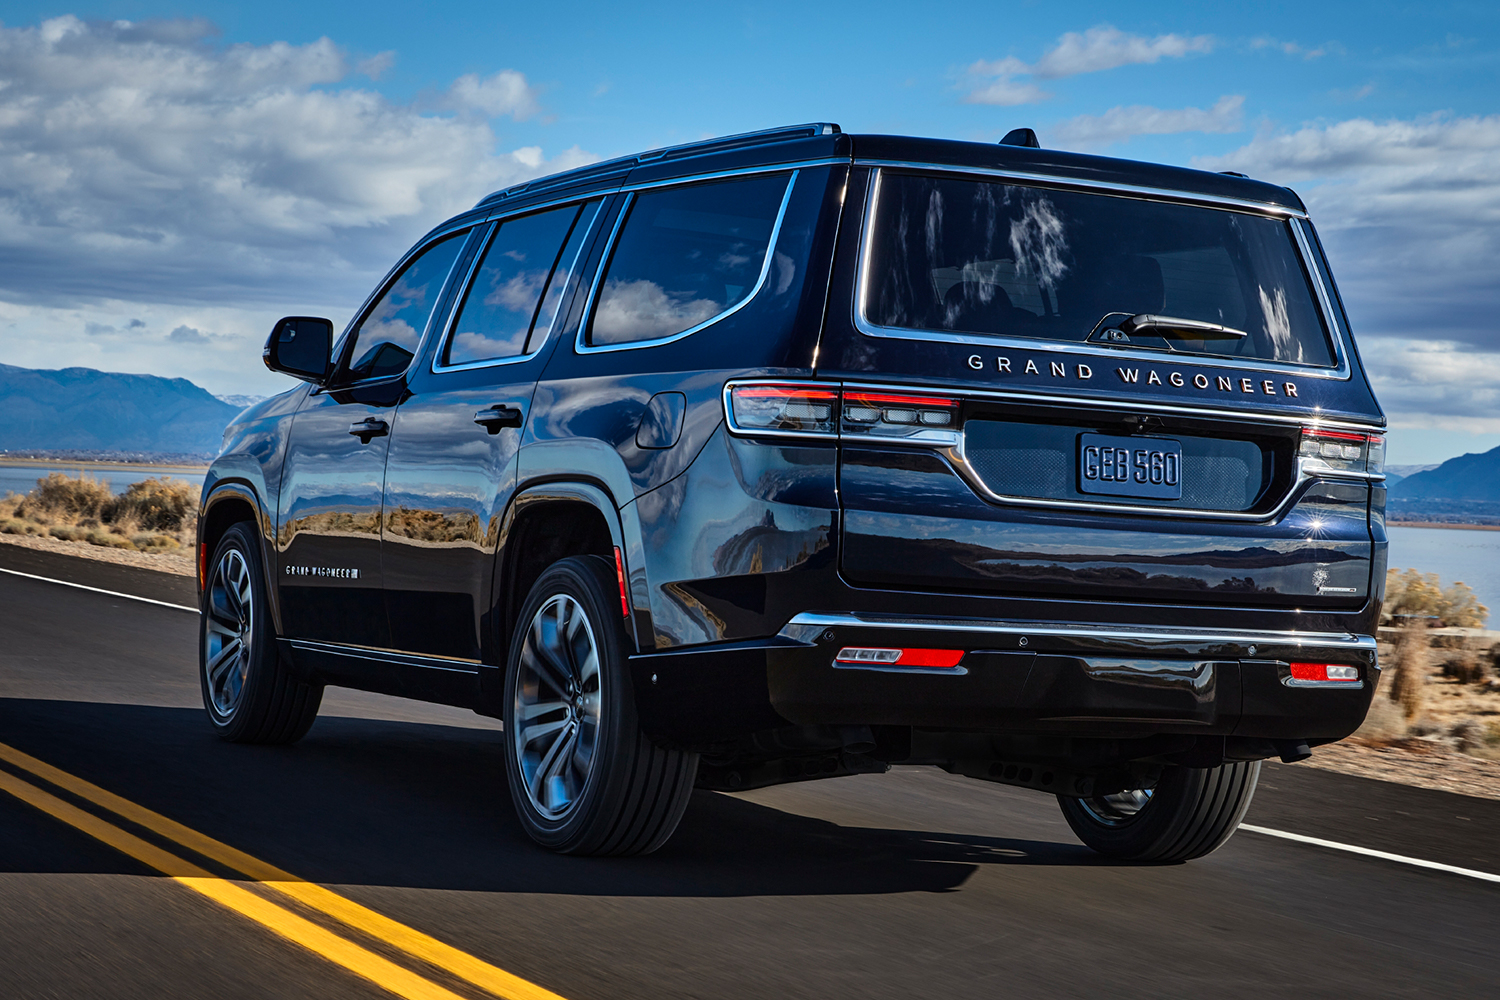 The 2022 Jeep Grand Wagoneer driving down the road shot from the rear left